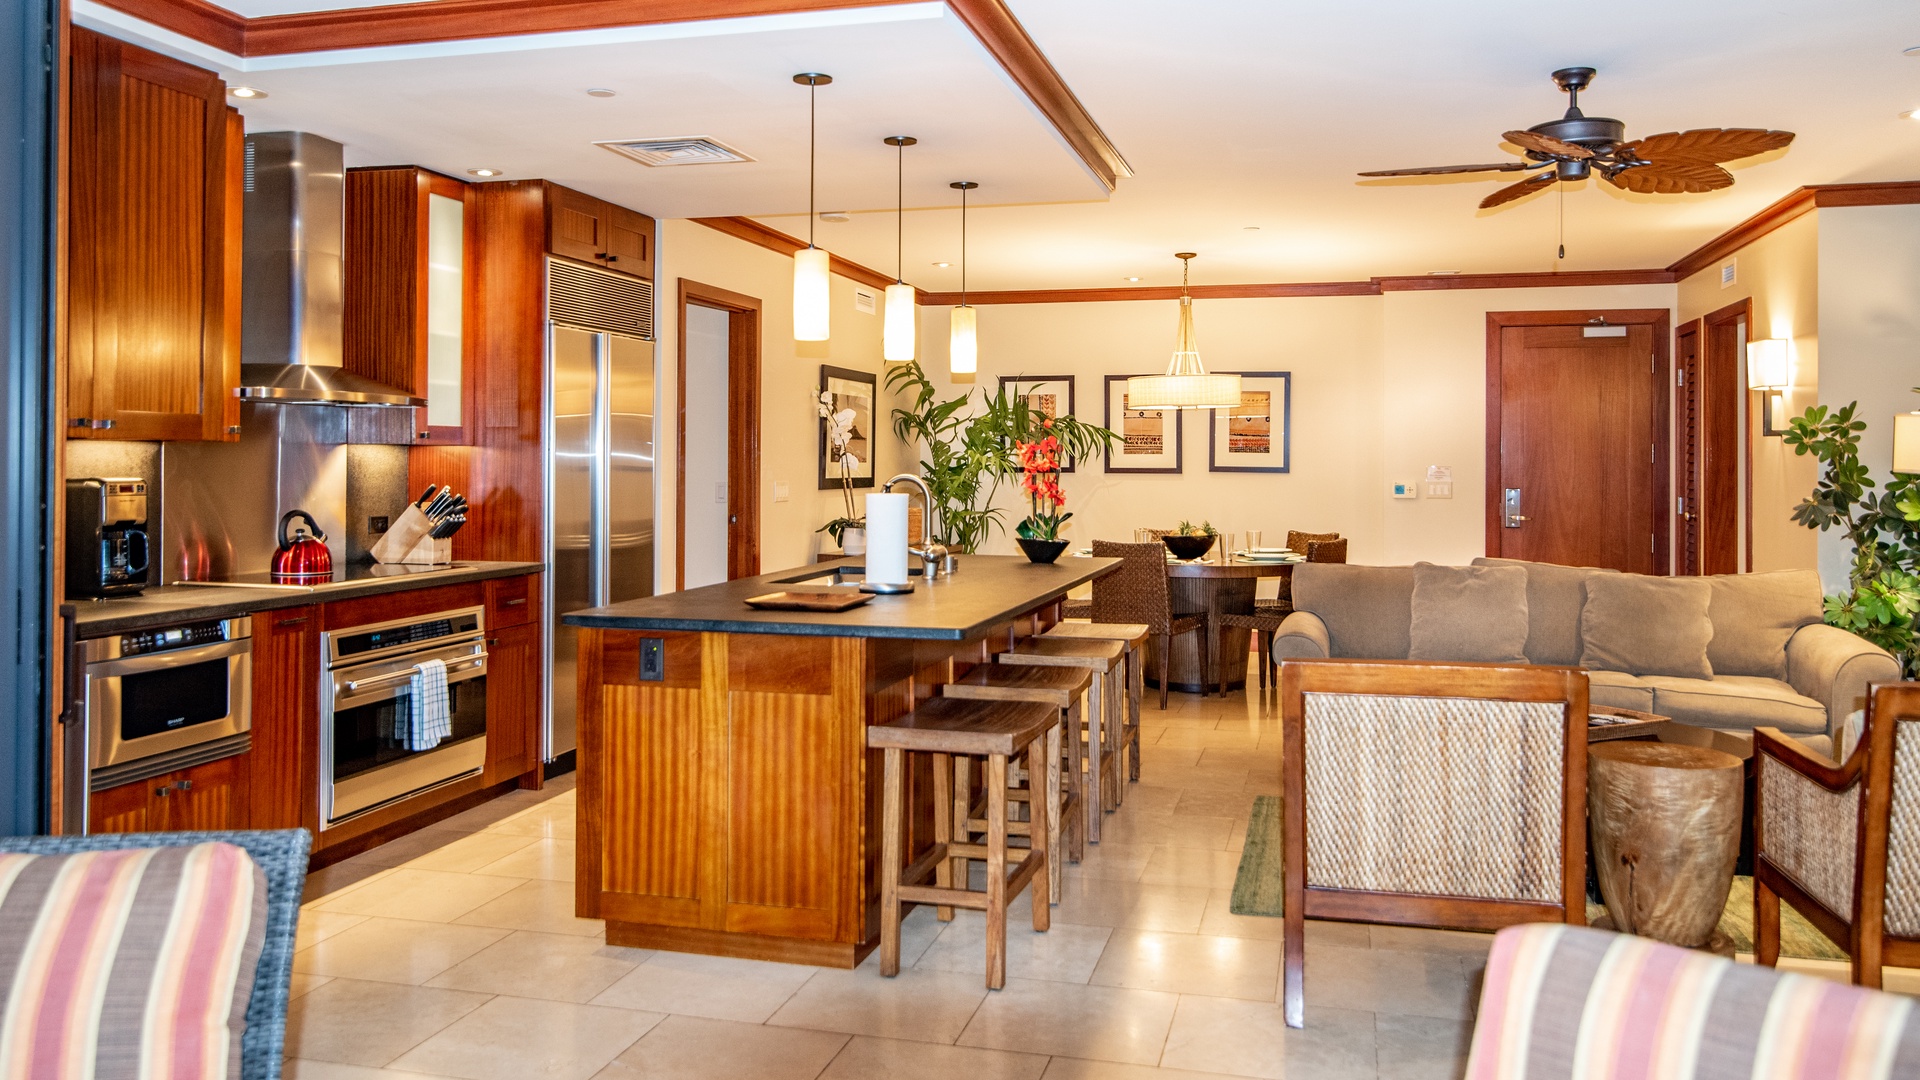 Kapolei Vacation Rentals, Ko Olina Beach Villas B505 - All the amenities for entertaining and relaxing.